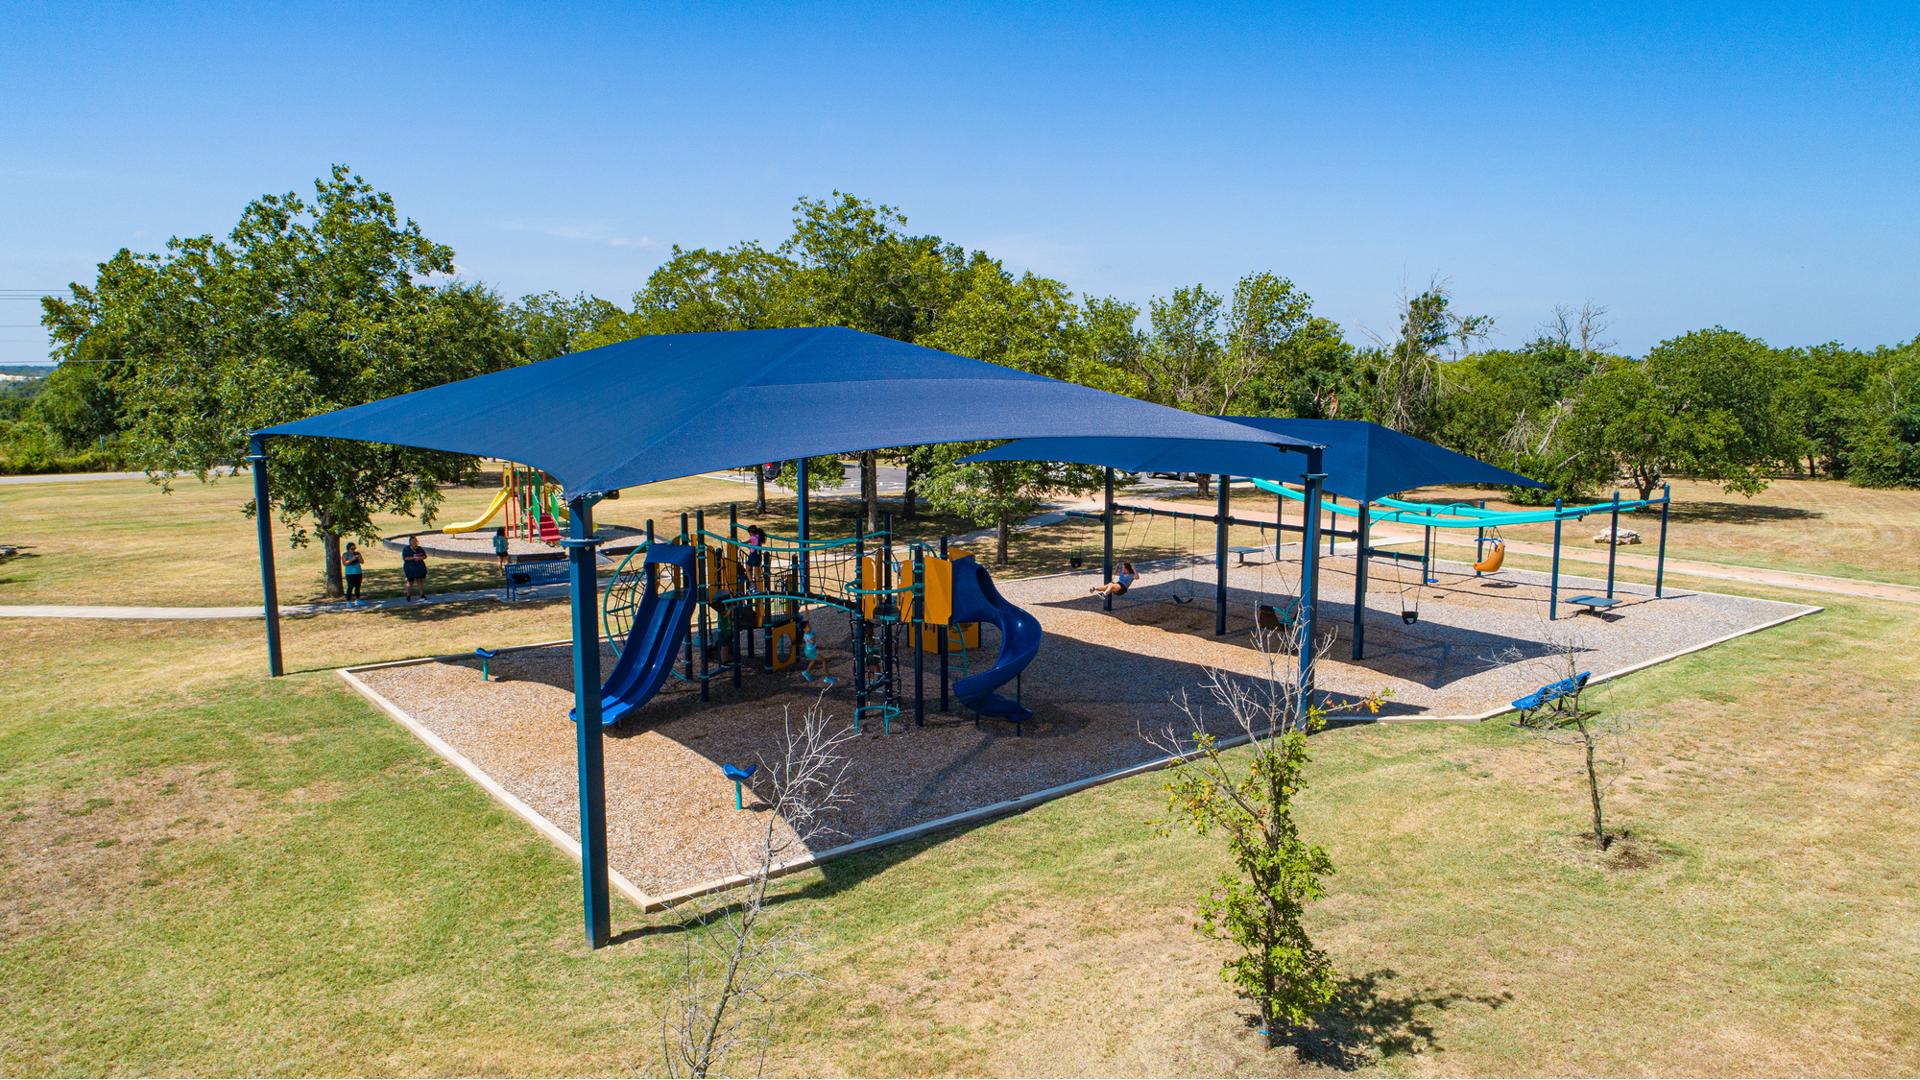 Elevated view of a large blue shade covering a playground structures with a secondary smaller shade right next to it covering a bay of swings.